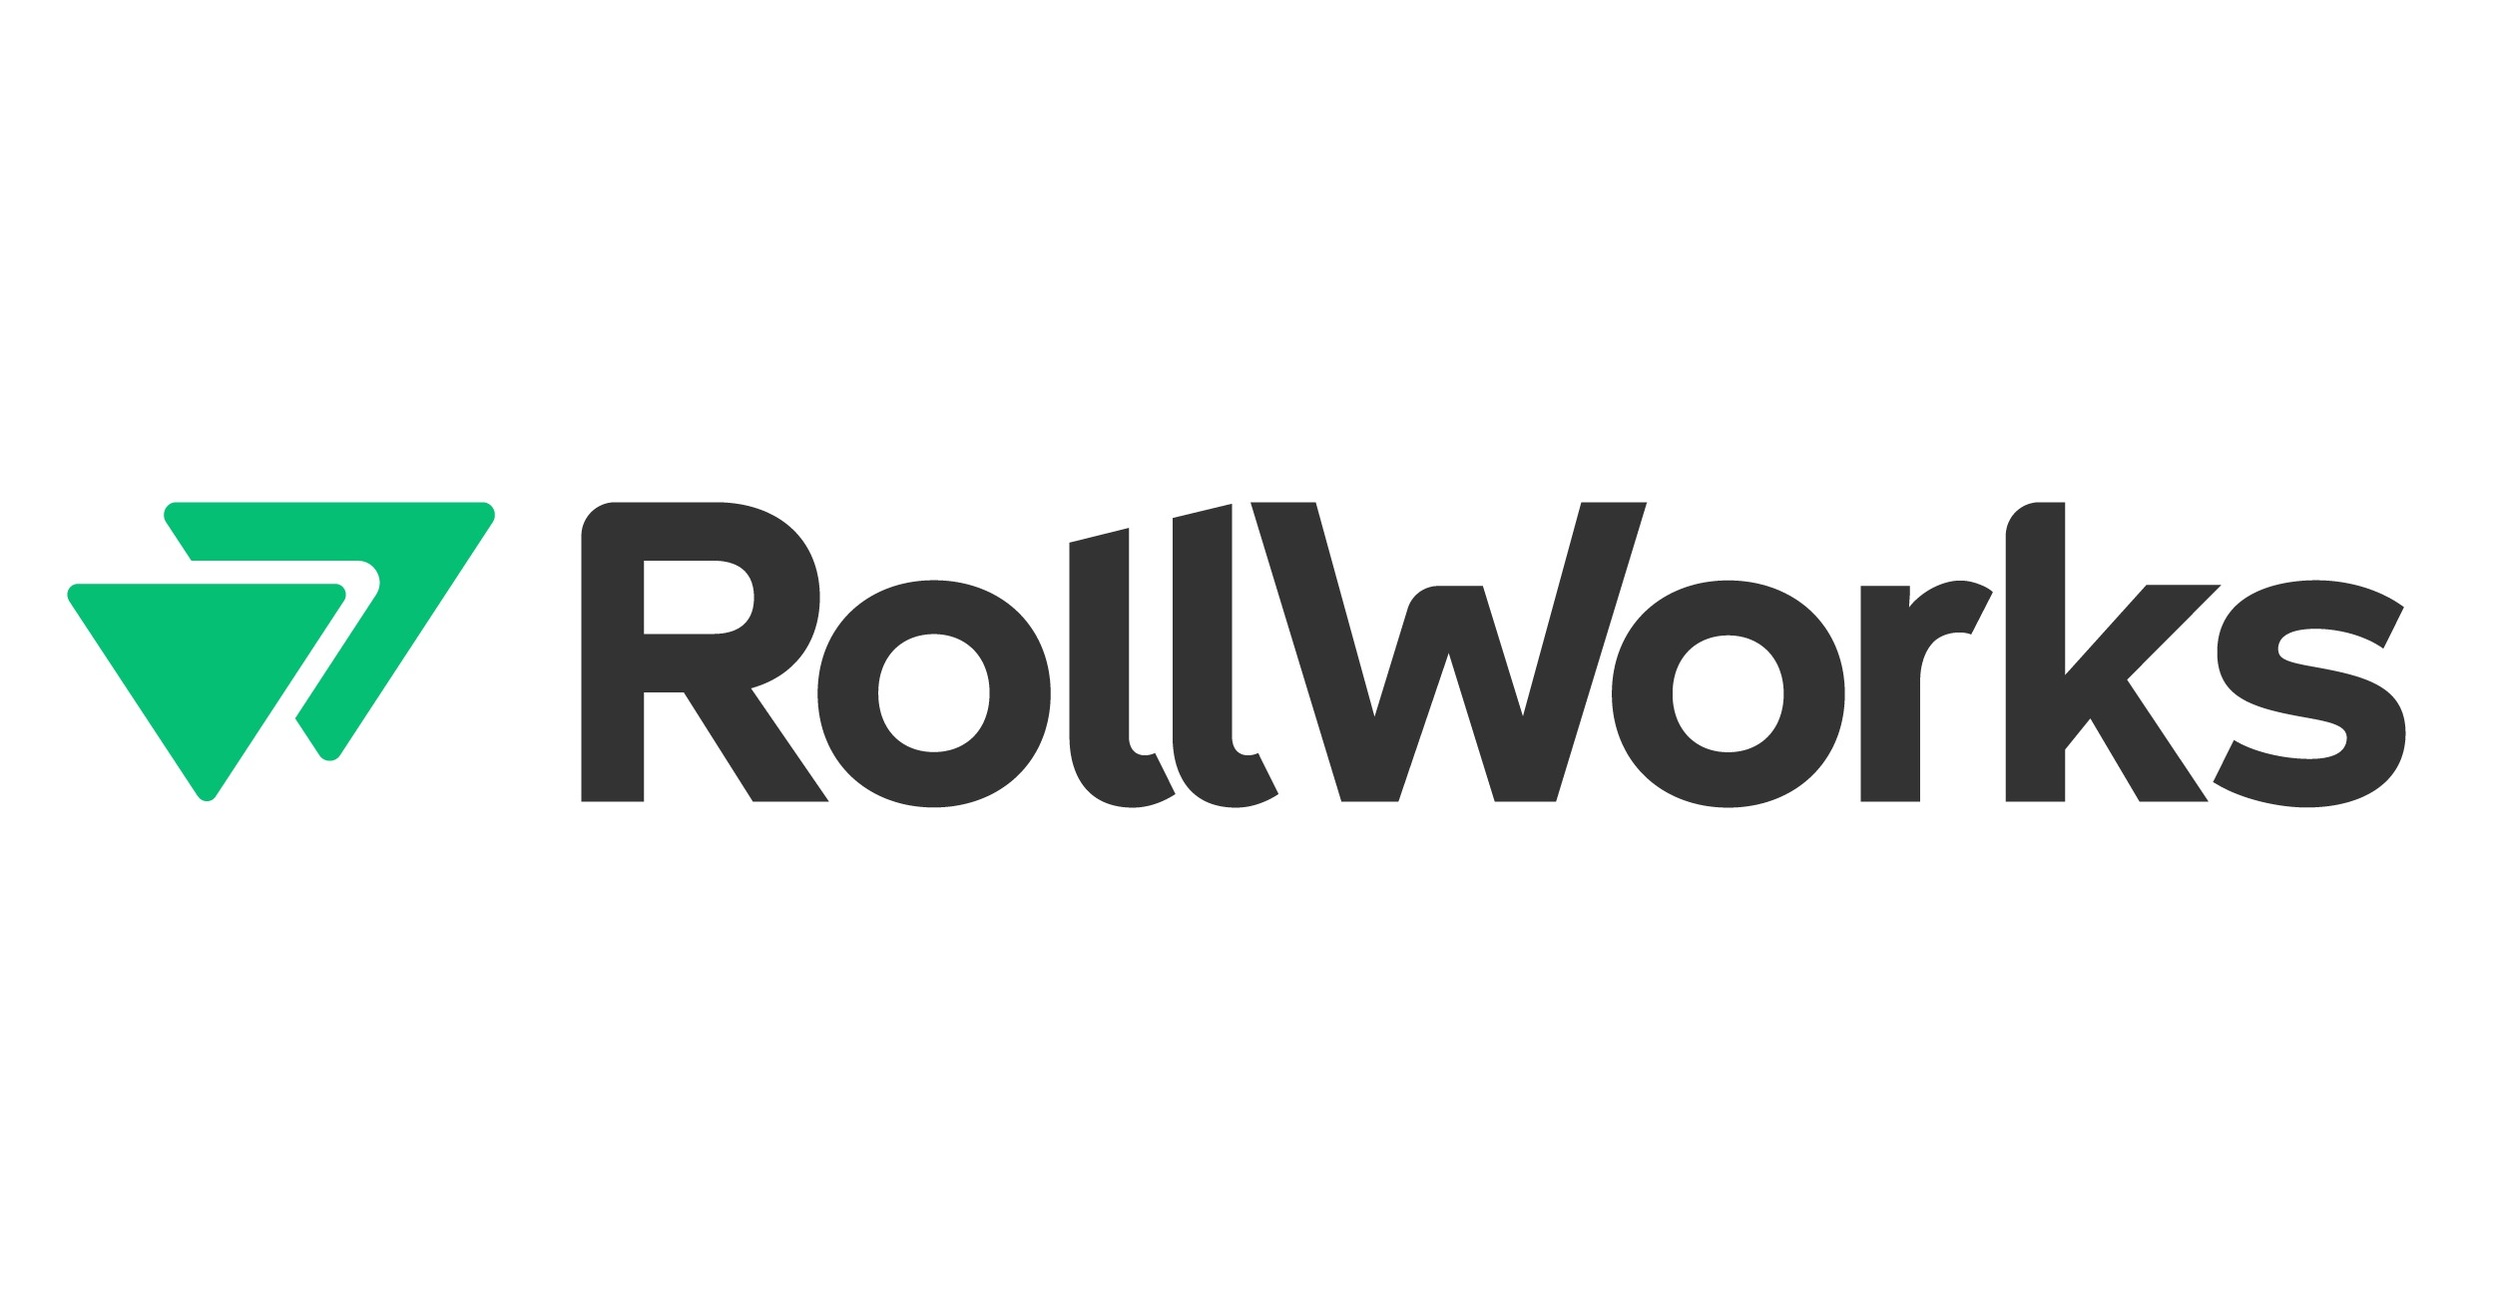 With Beta Launch of Account Insights, RollWorks Can Now Show Marketers the Exact Moment When an Unknown Account Becomes "In Market"